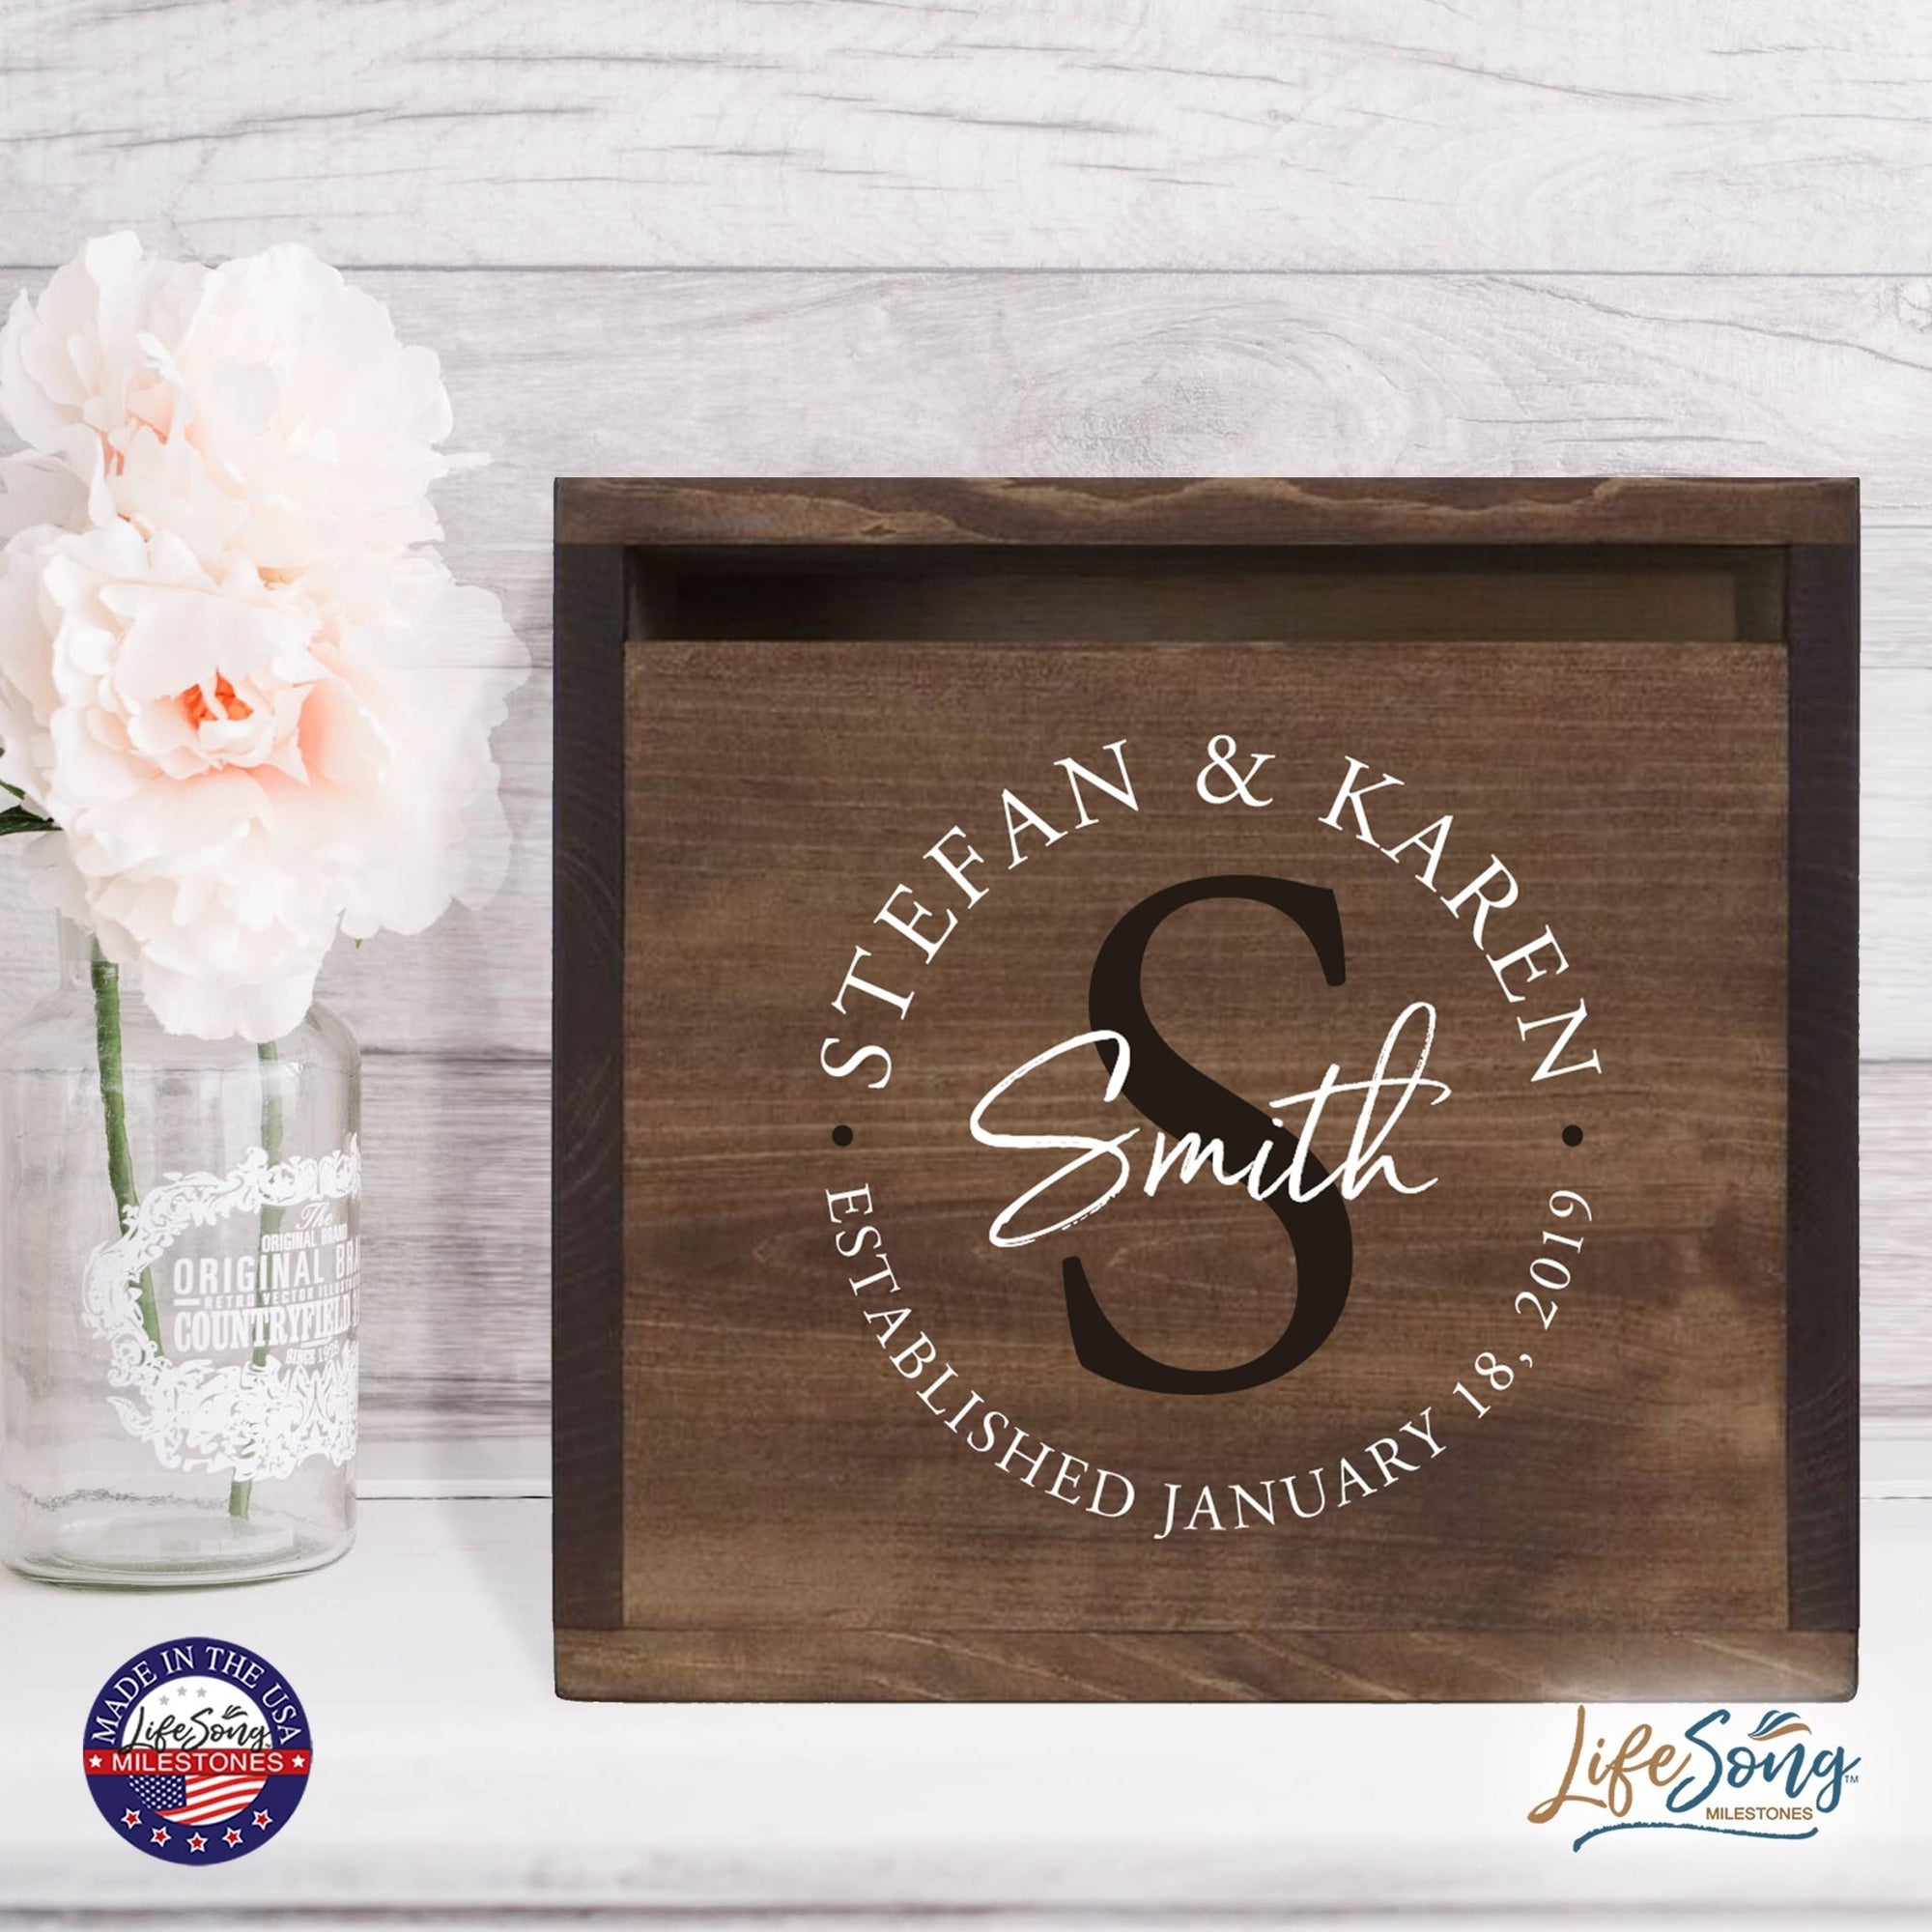 Personalized Wooden Card Box for Wedding Ceremonies, Venues, Receptions, Bridal Showers, and Engagement Parties 13.5x12 - Stefan & Karen (S) - LifeSong Milestones